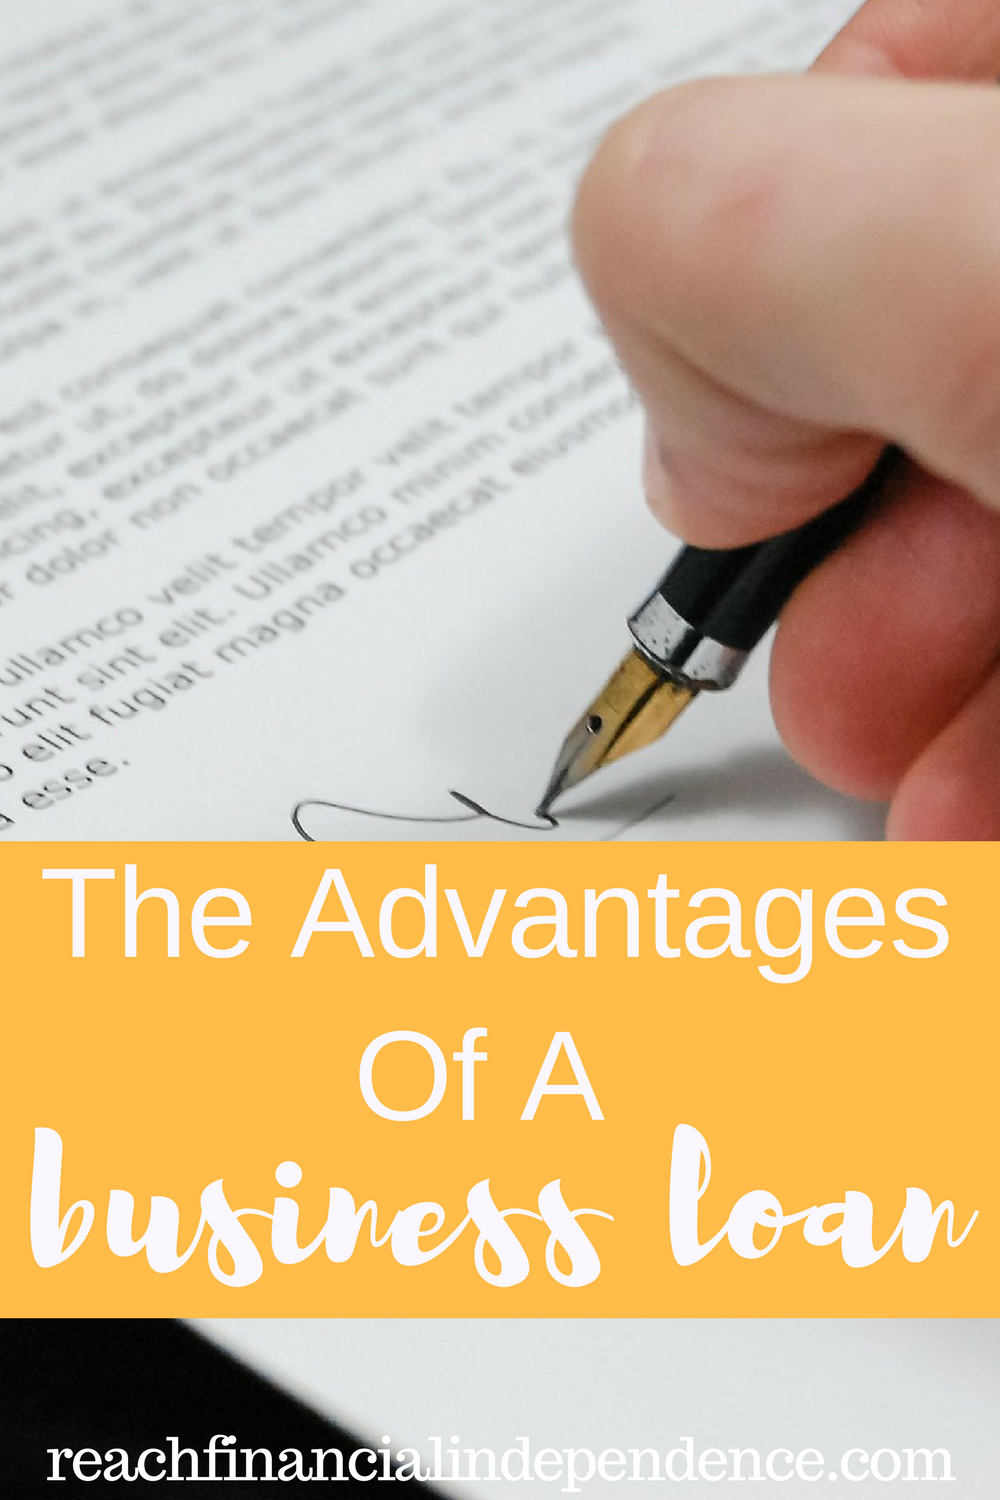 The Advantages Of A Business Loan